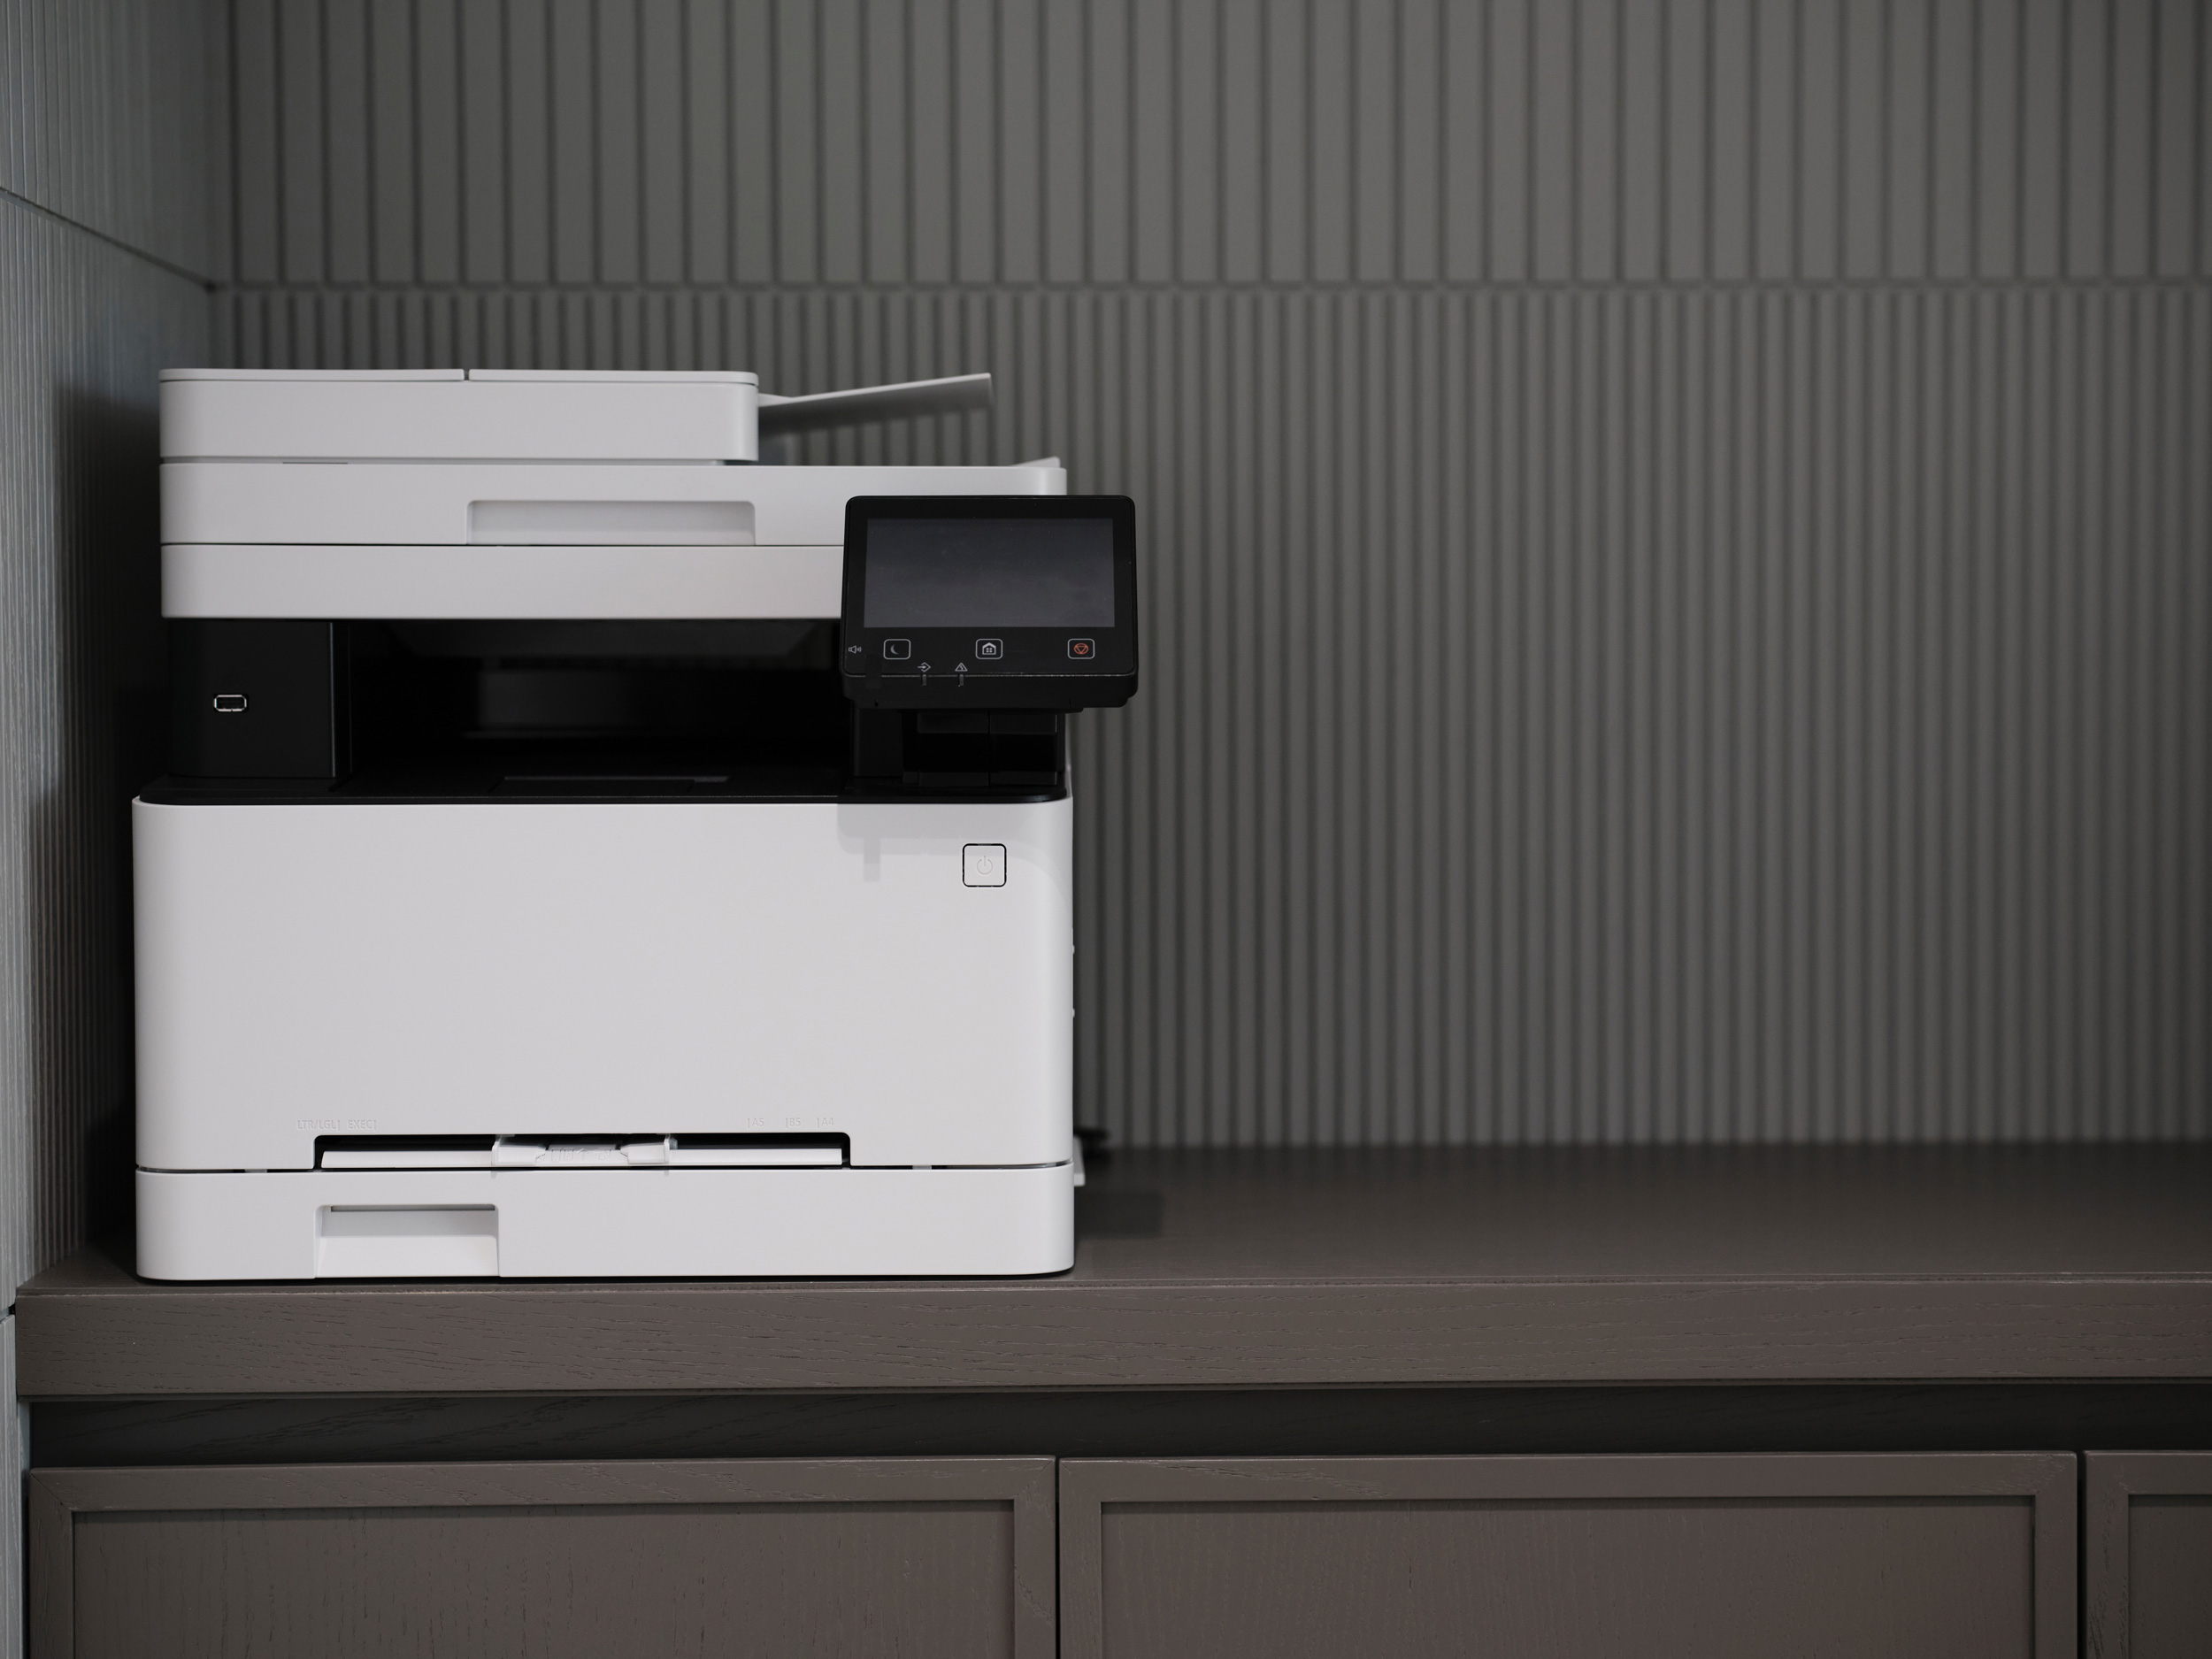 Printer Repair vs. Replacement: How to Make the Right Decision